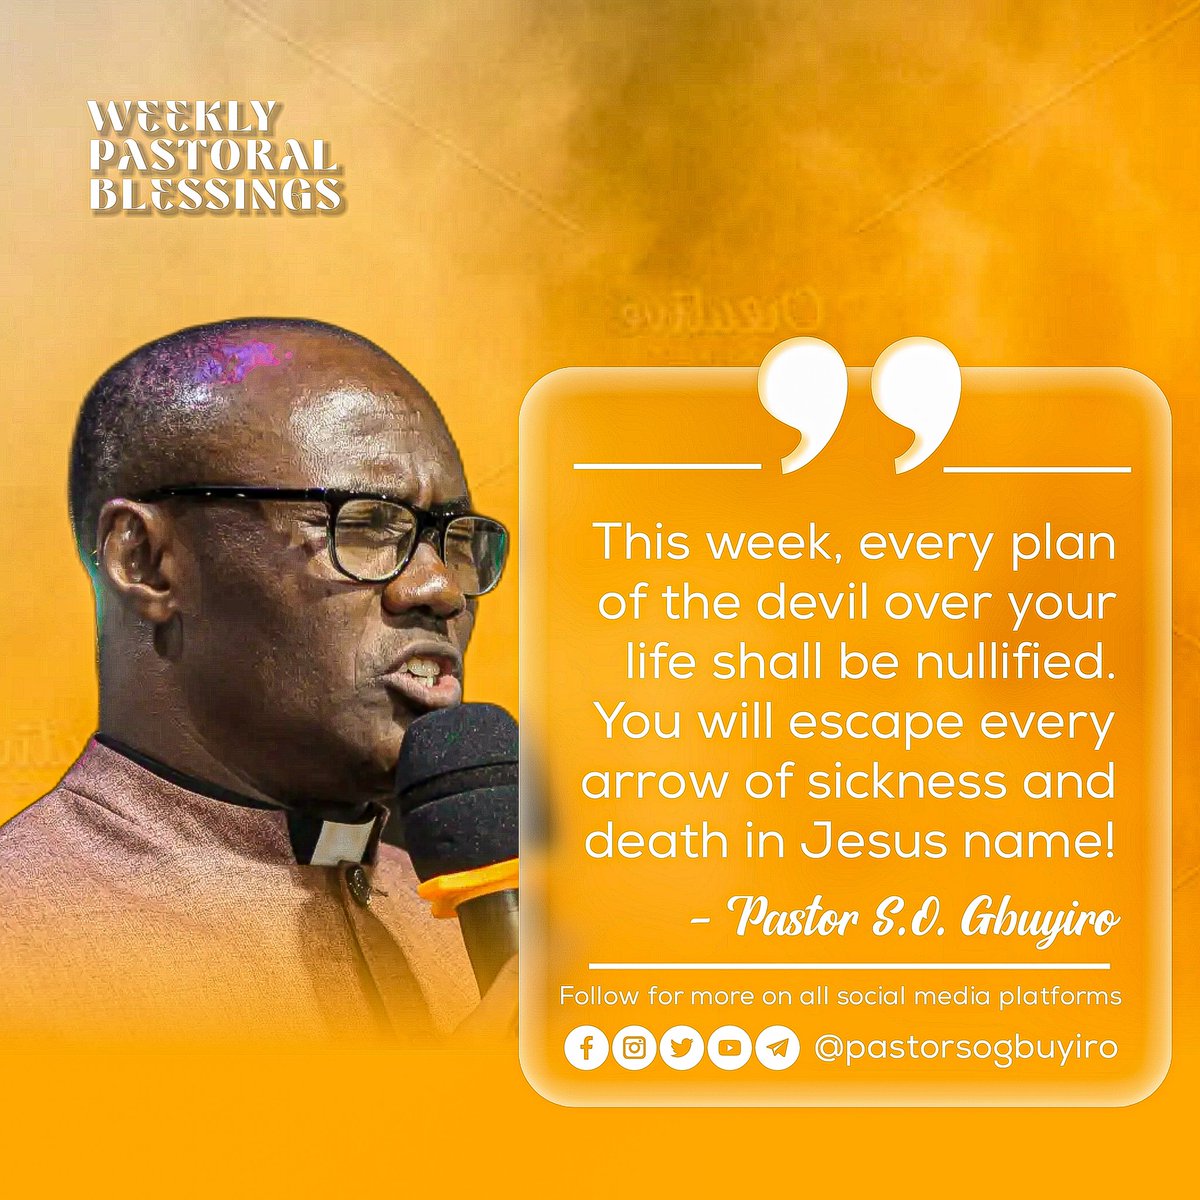 Every plan of the devil over your life shall be nullified. You will escape every arrow of sickness and death in Jesus name !

#weeklypastoralblessings
#newweekblessings
#pastorsogbuyiro
#cacyouthdirector
#cacnigeriaandoverseas